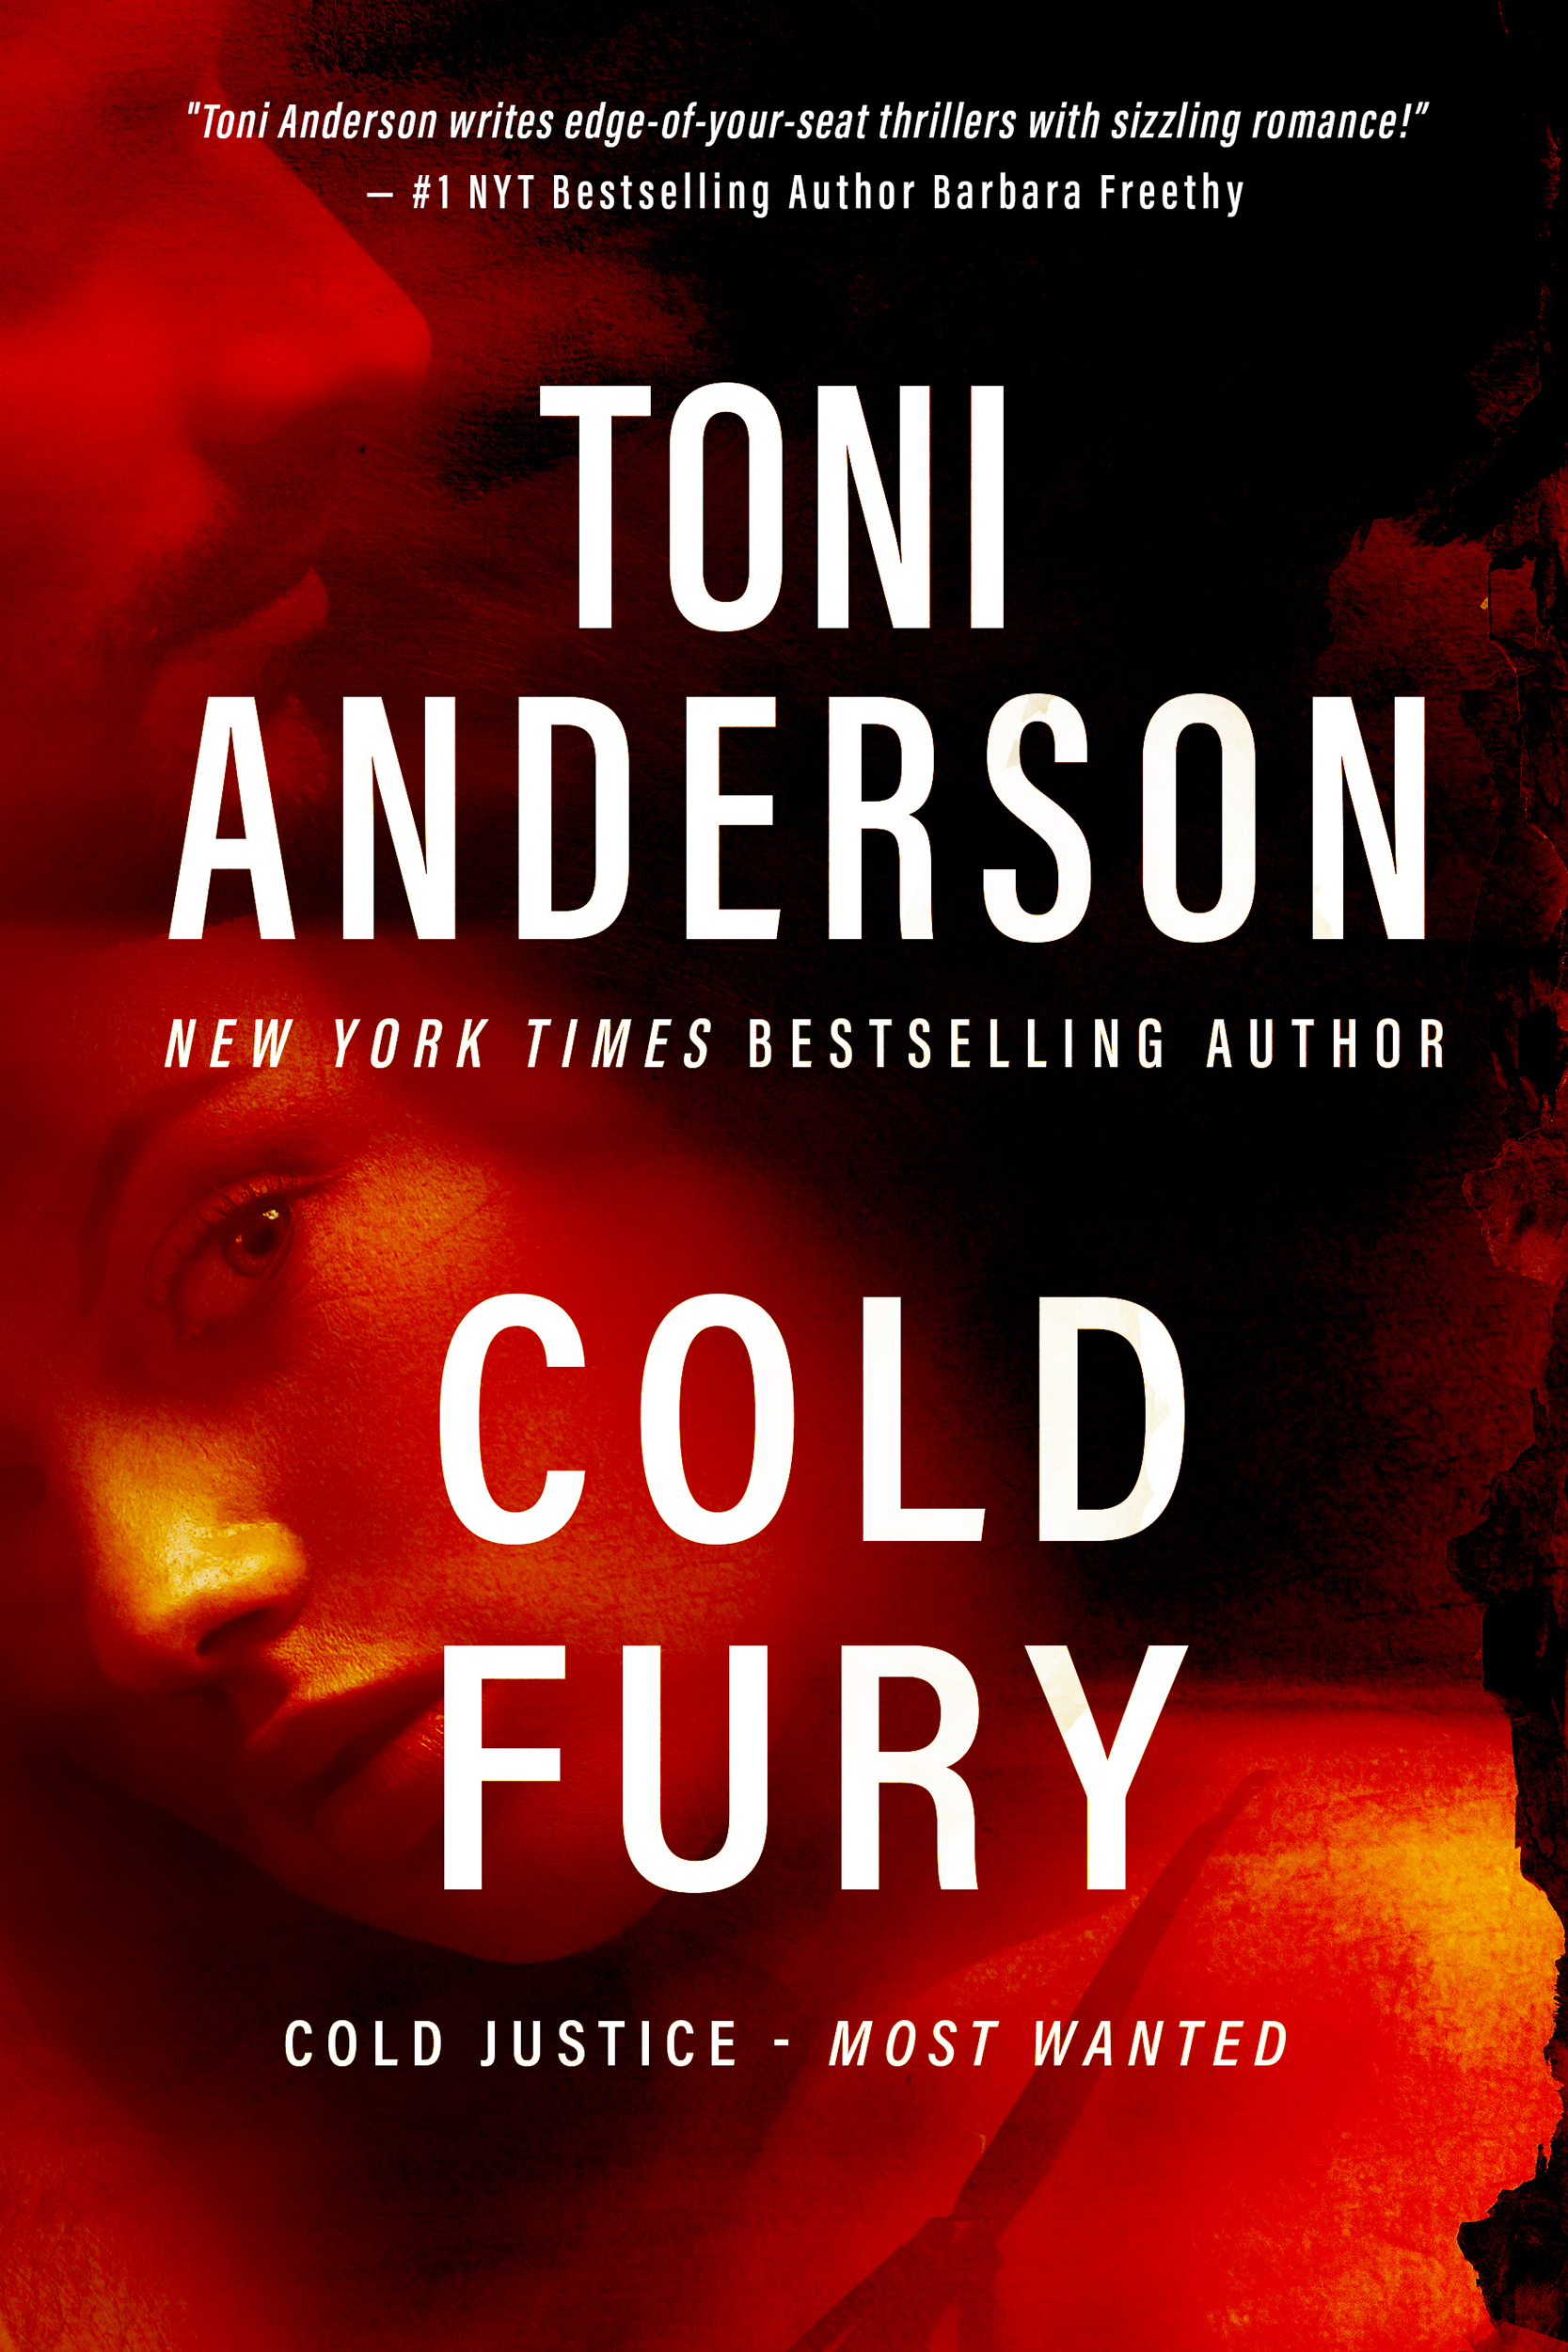 Cold Fury - A Romantic Thriller by Toni Anderson